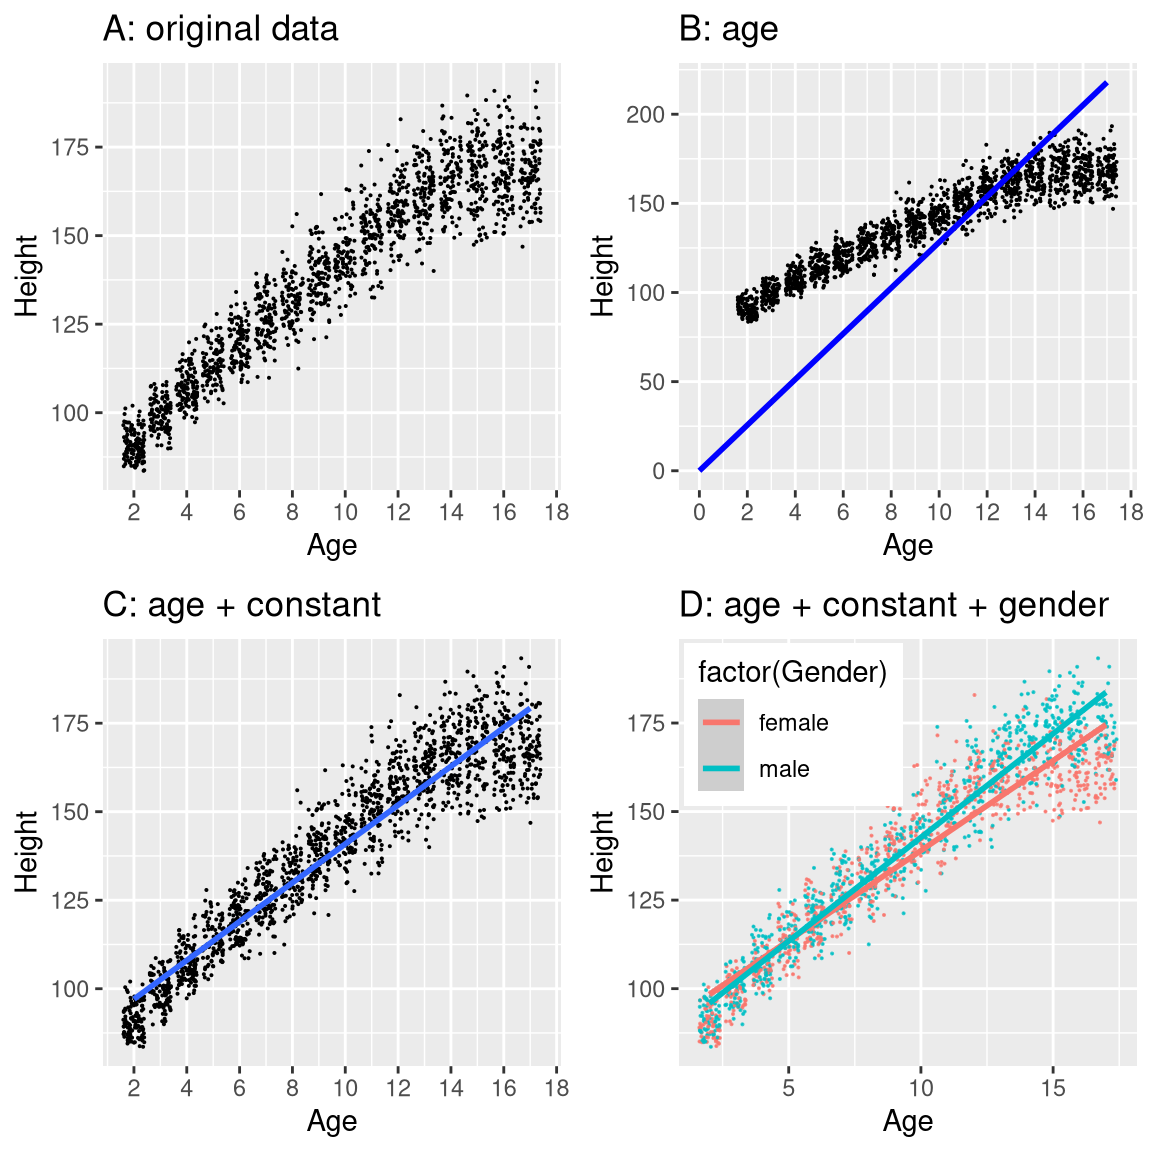 Height of children in NHANES, plotted without a model (A), with a linear model including only age (B) or age and a constant (C), and with a linear model that fits separate effects of age for males and females (D).